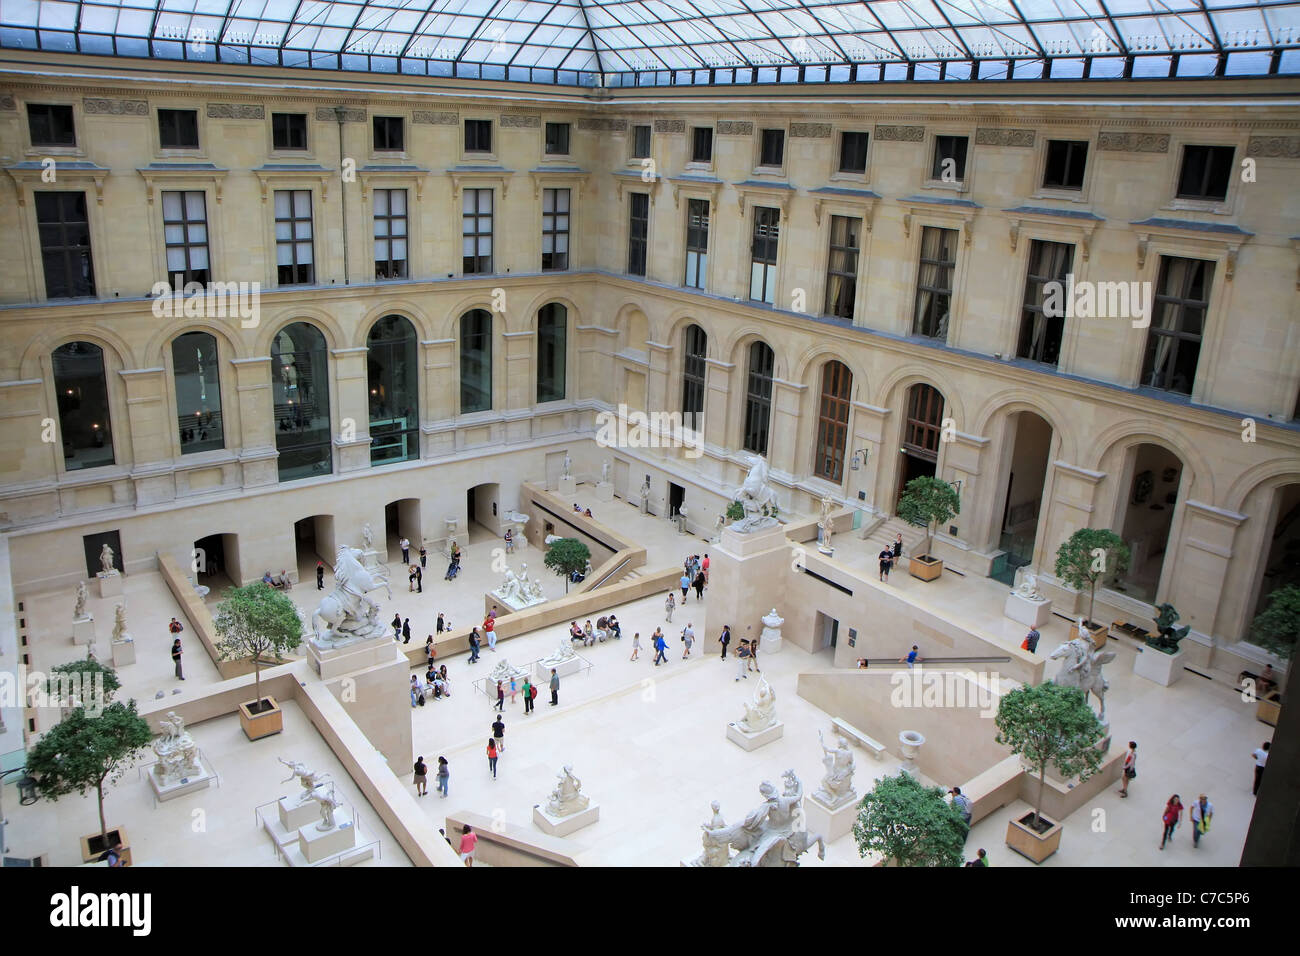 Aerial inside view of the Louvre museum, Paris, France Stock Photo